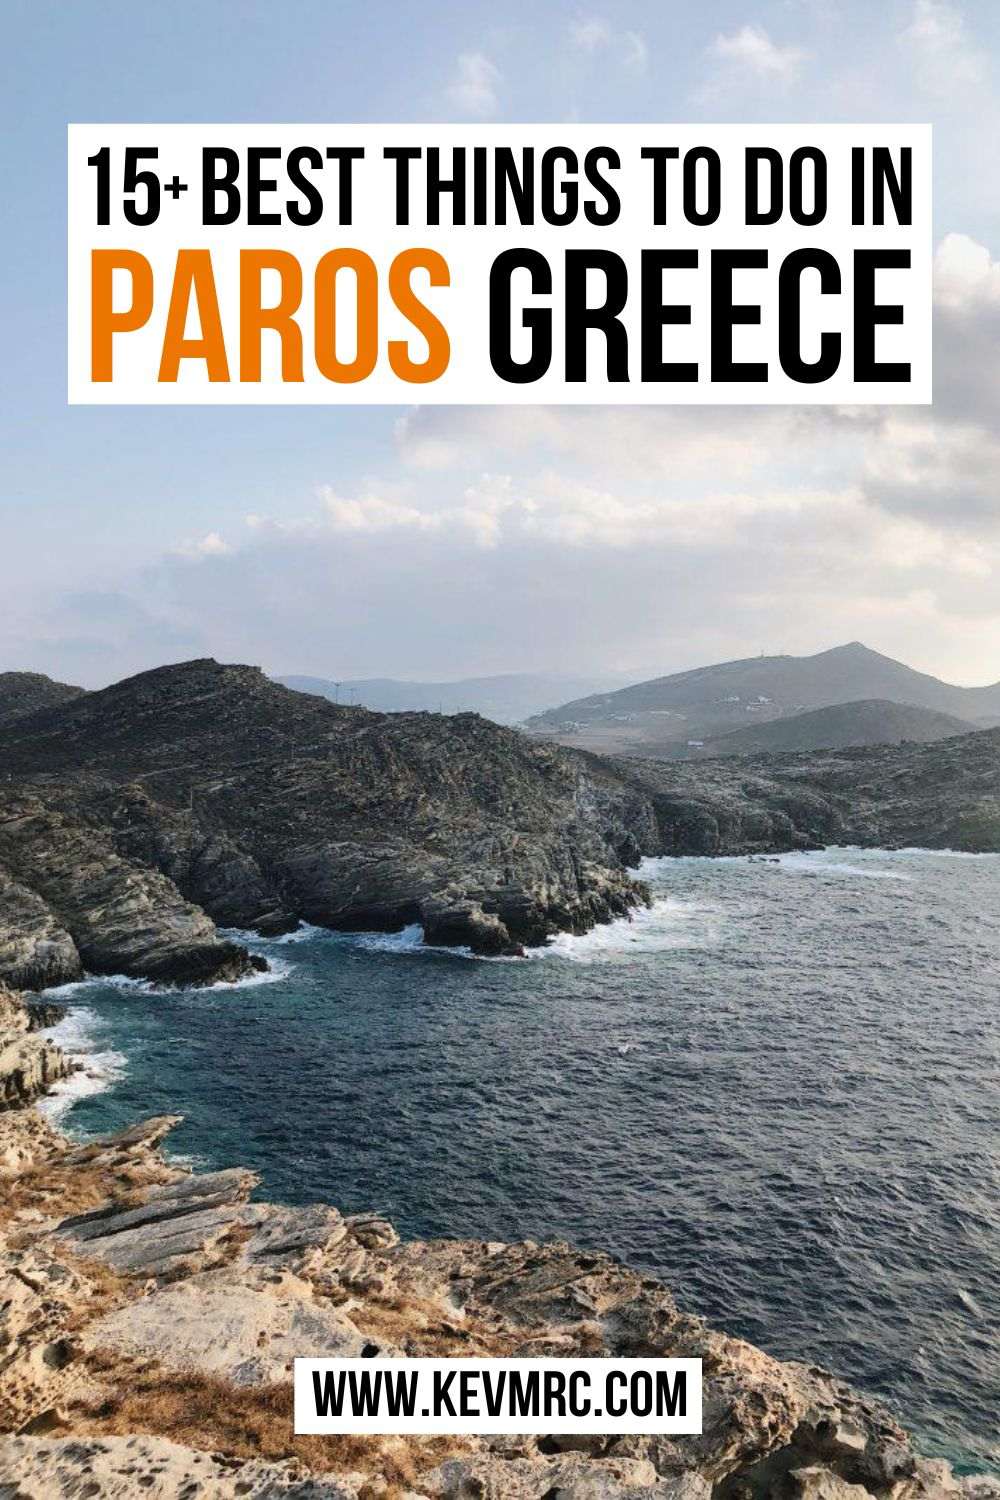 Wondering what to do in Paros? In this guide, find all the best things to do in Paros Greece, along with tips and info for a successful trip. top things to do in paros greece | what to do in paros greece travel | paros island greece travel | paros greece travel guide tips #paros